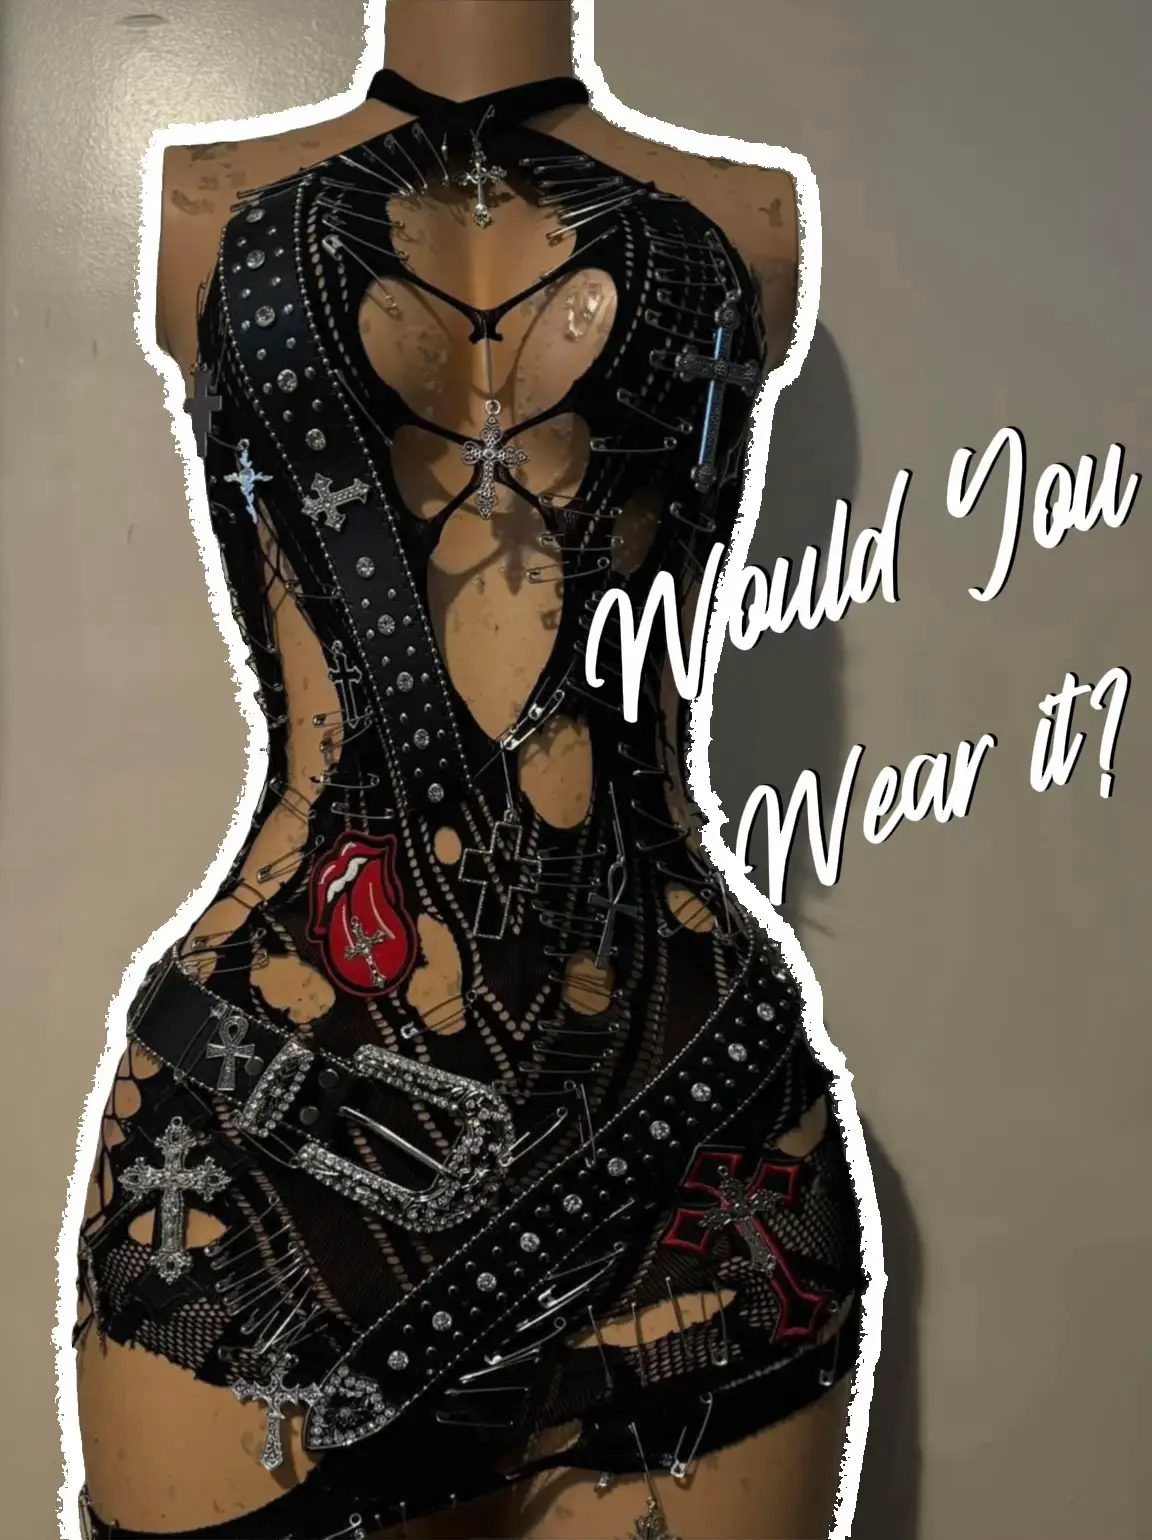 Tattooed female full body suit! Like & share! #fypシ #fyp #viral